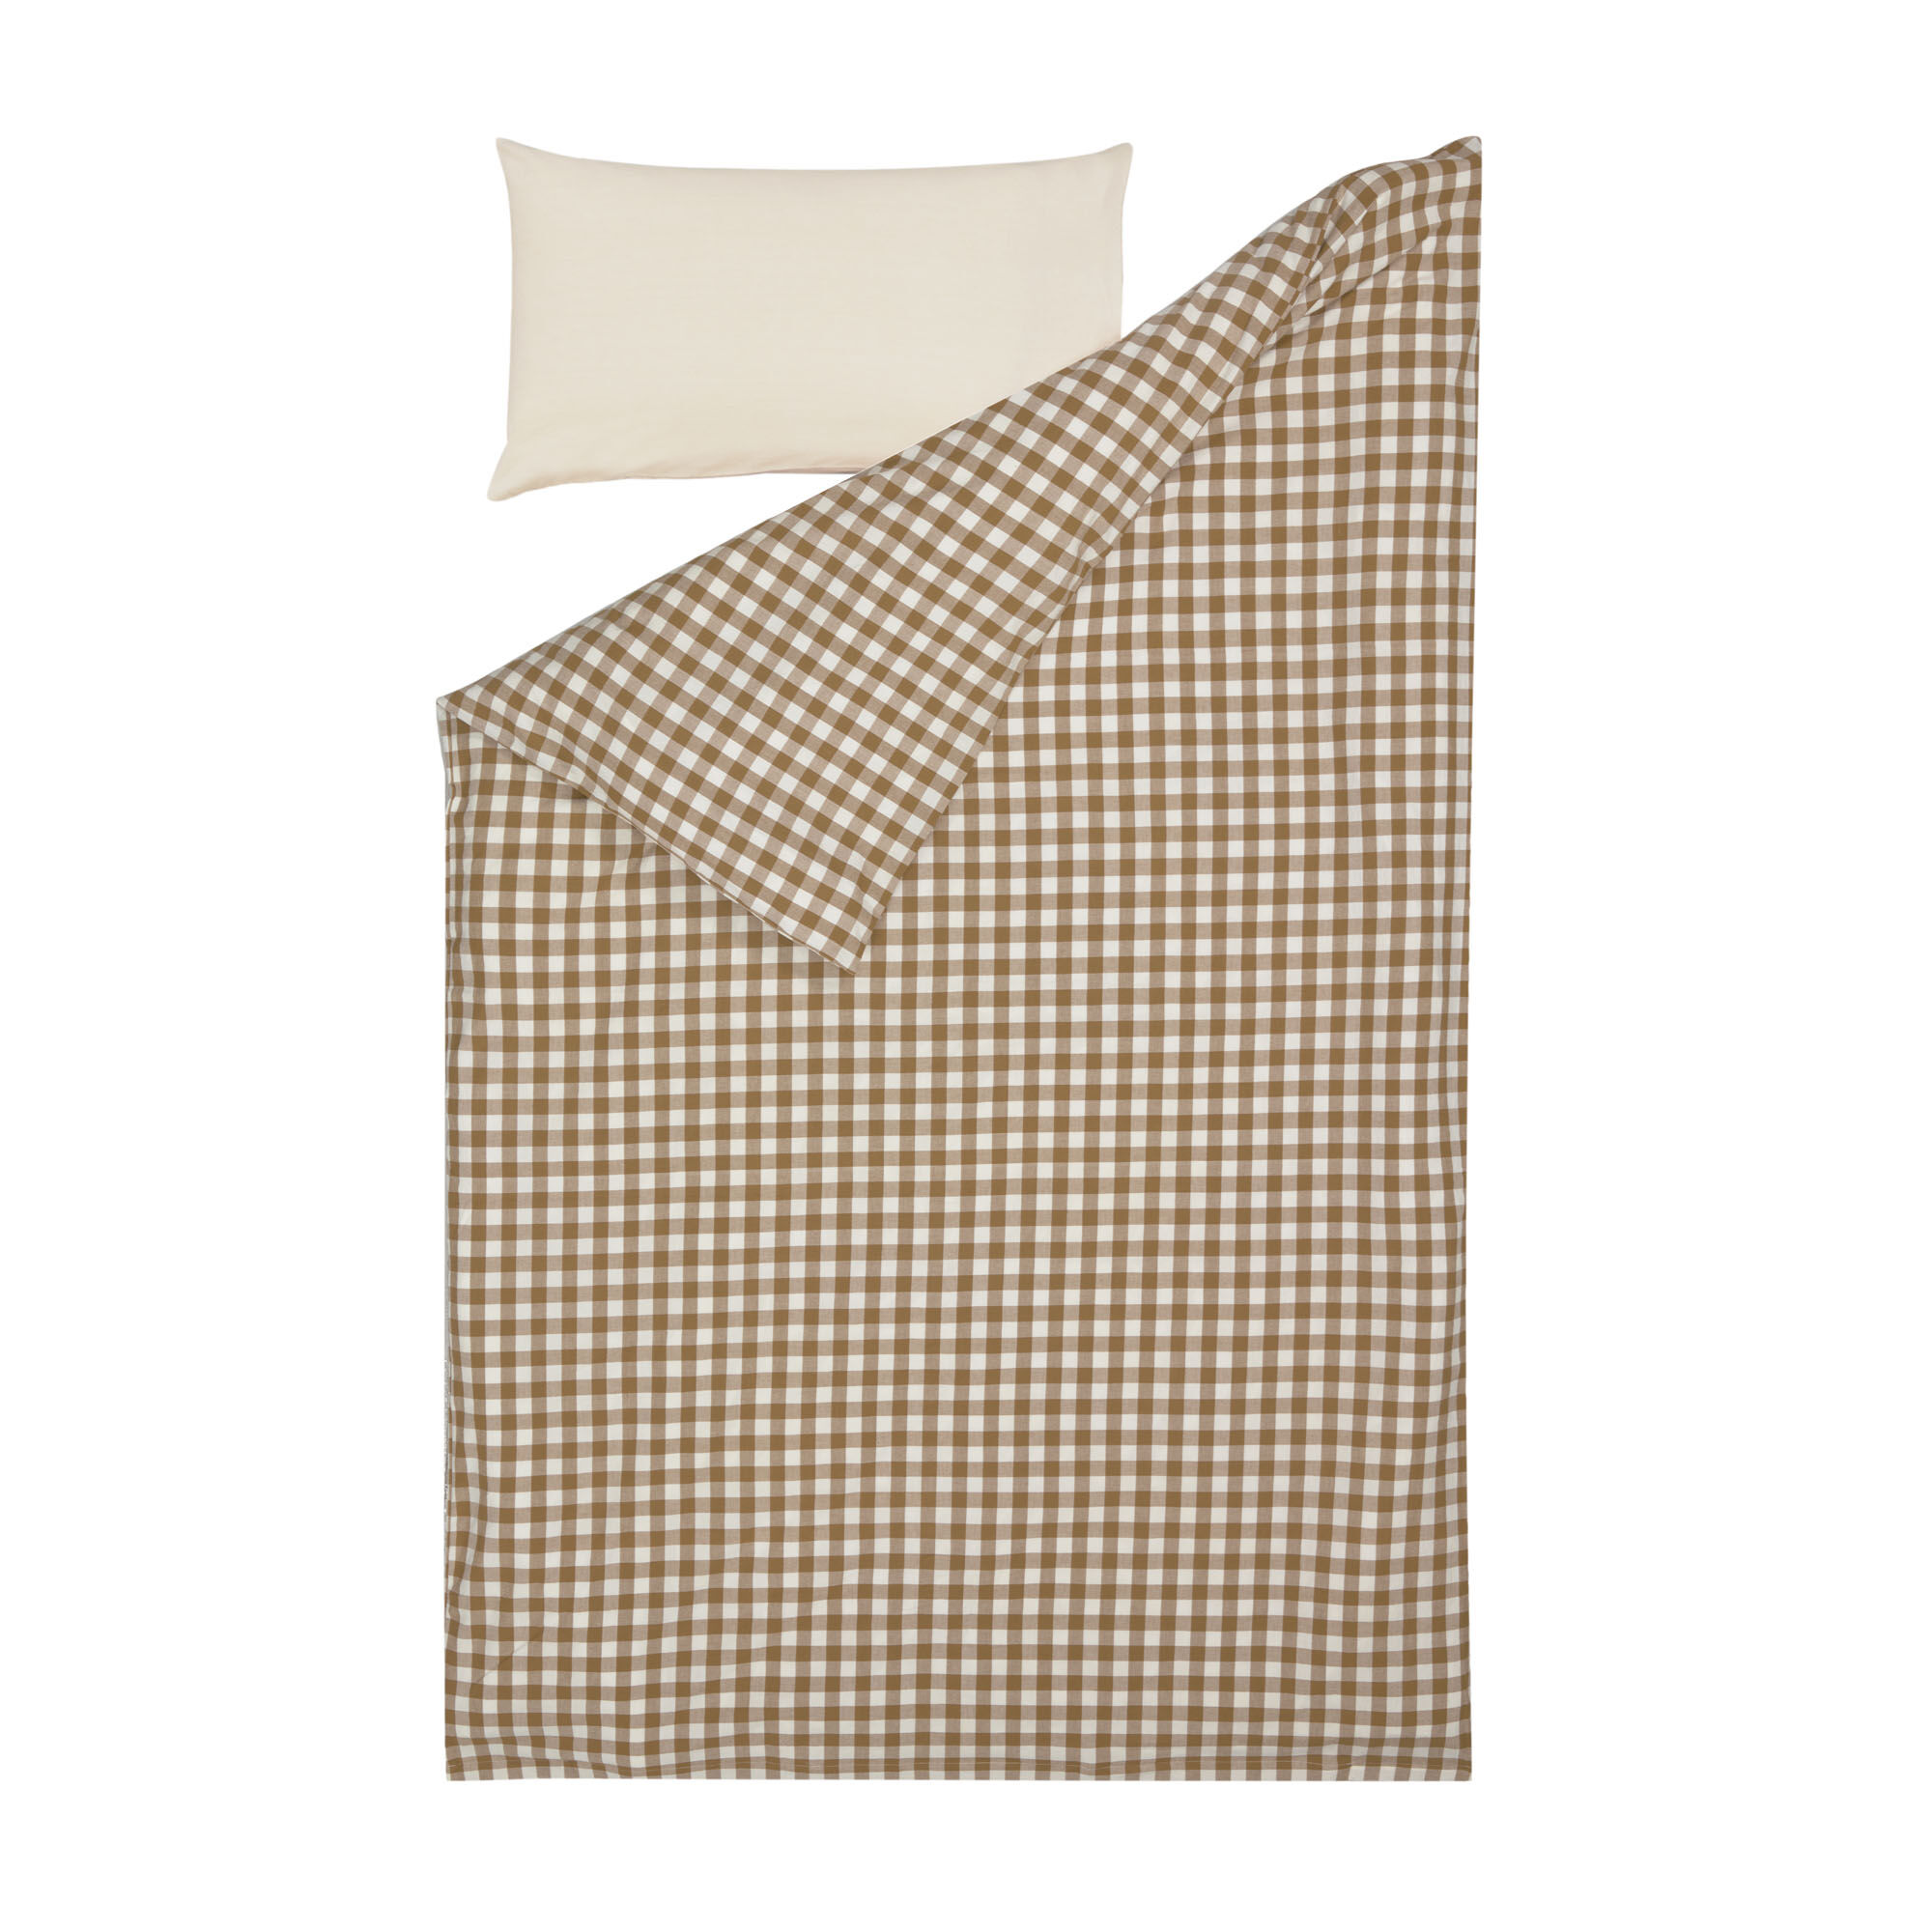 Kave Home Indalina duvet cover, sheet & pillowcase set in gingham GOTS-certified cotton 60 x 120 cm